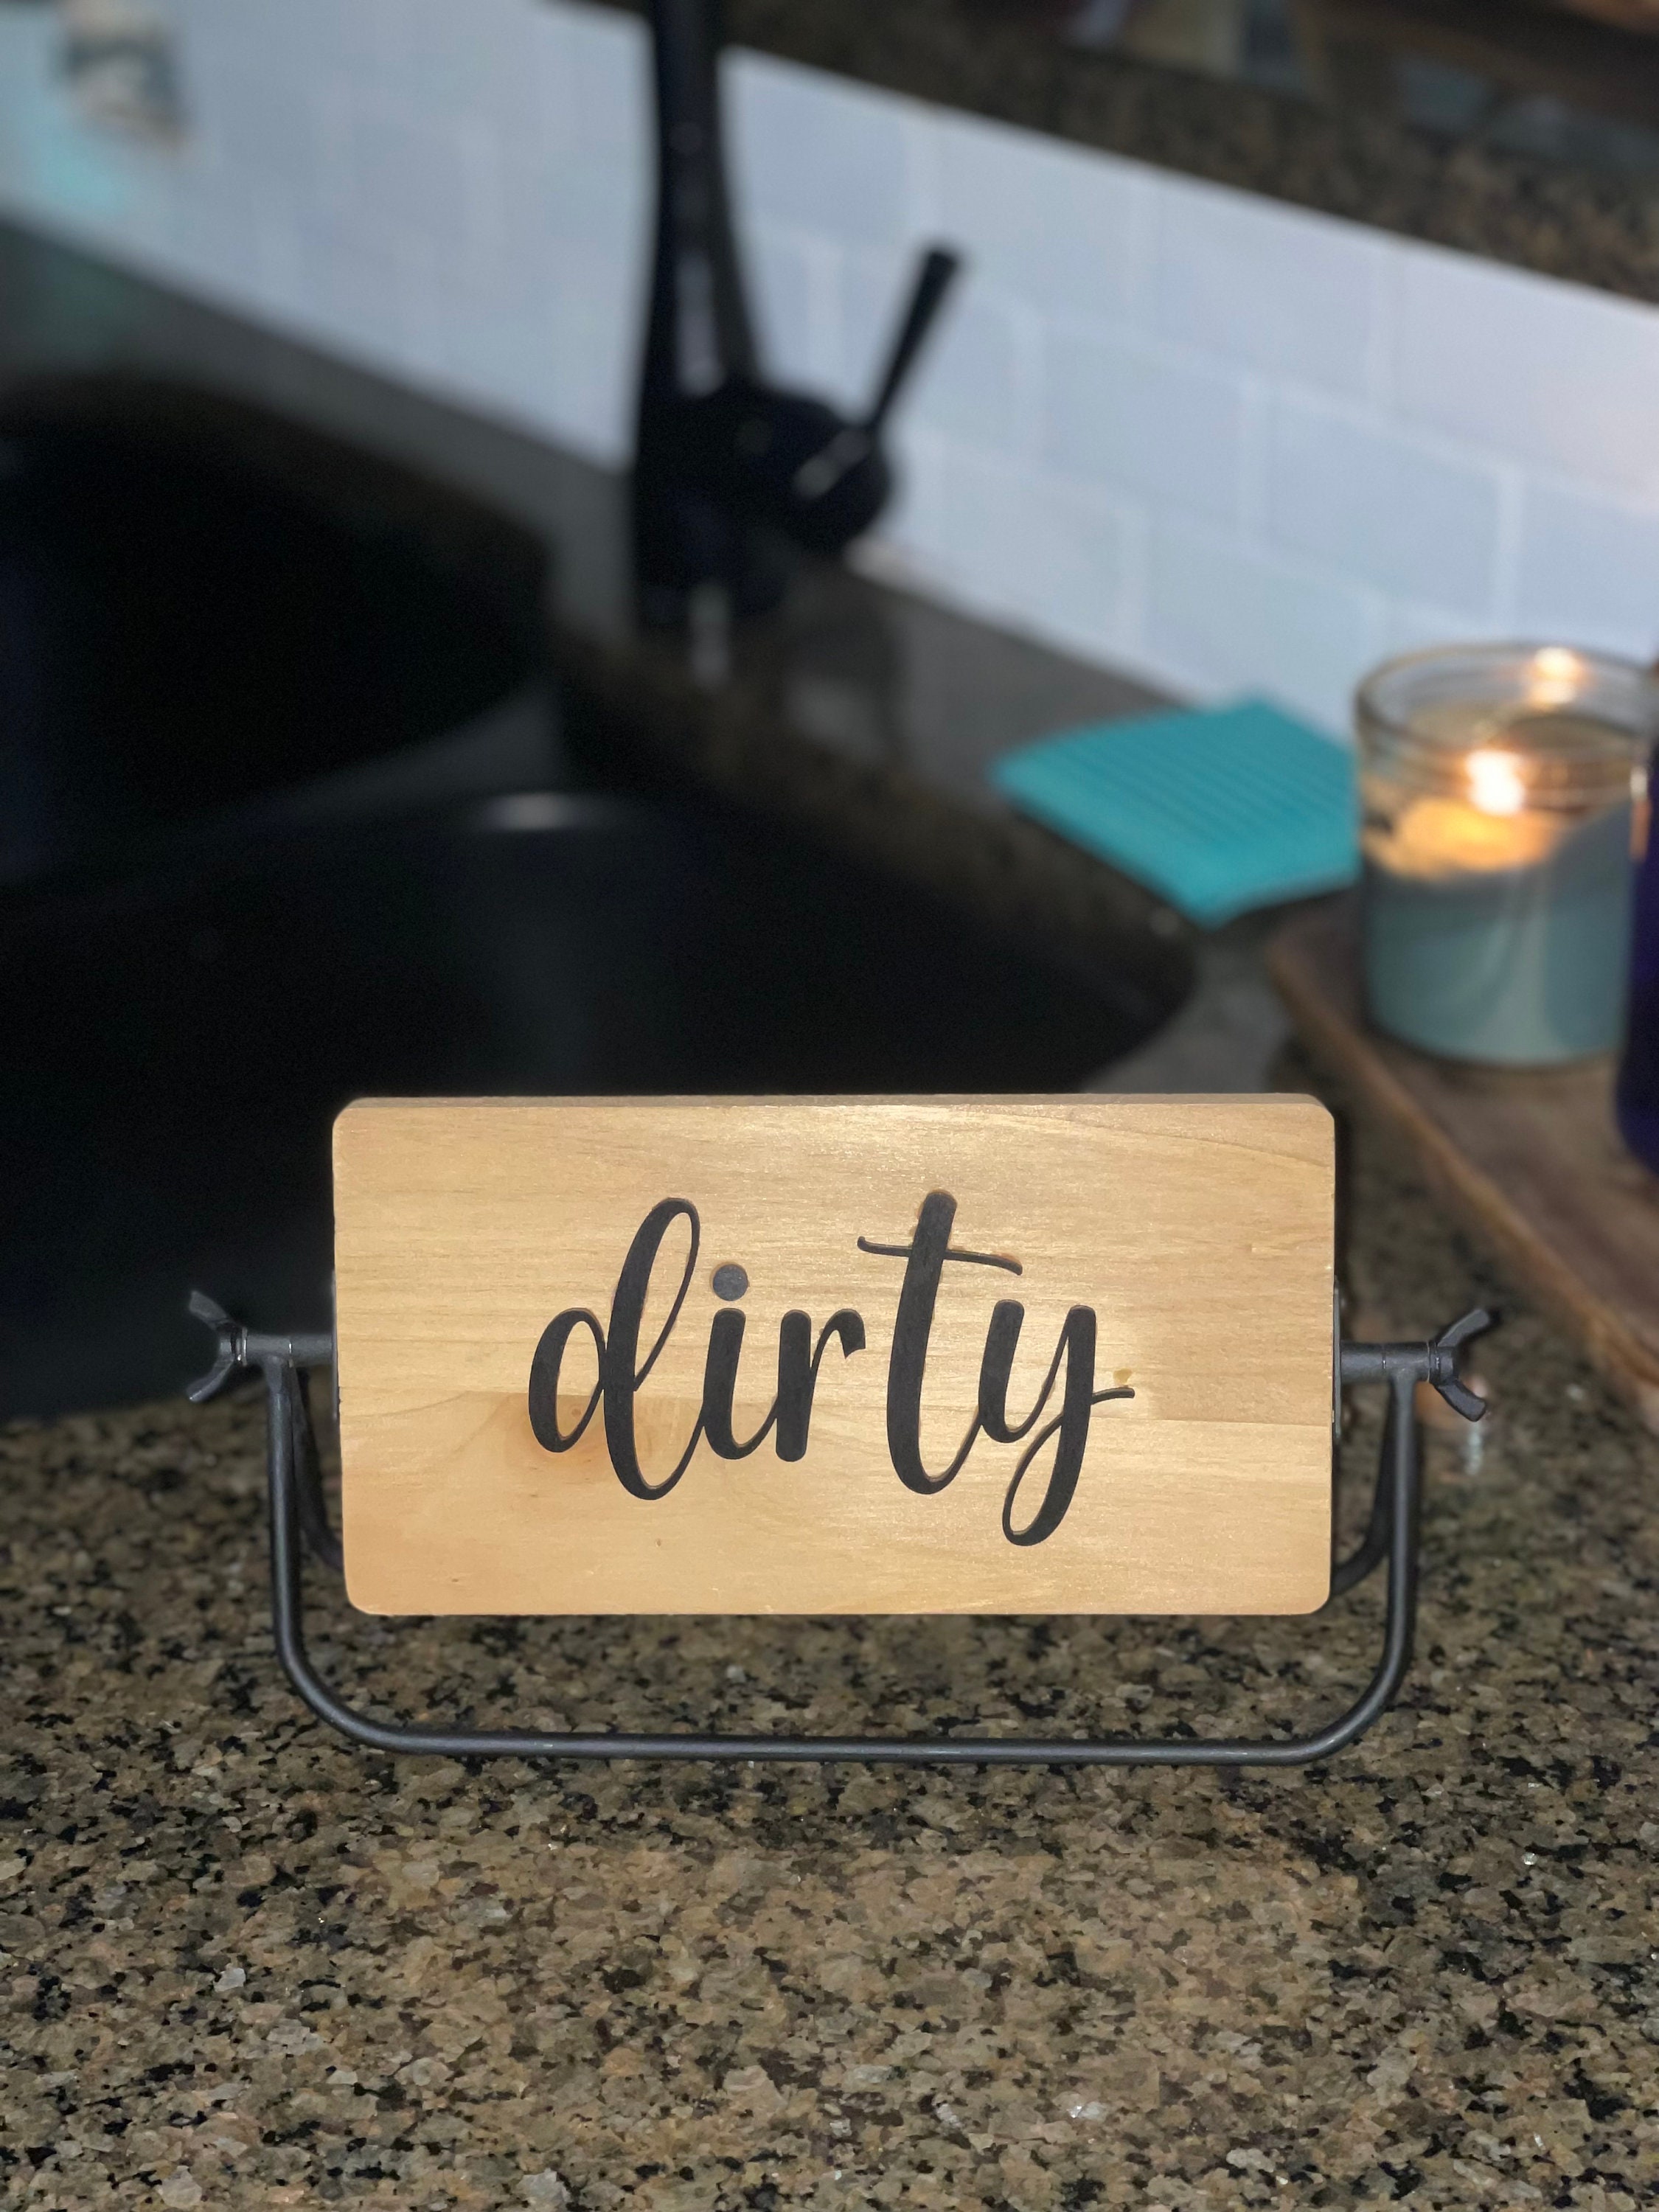 Modern Clean Dirty Dishwasher Flip Magnet With Clean Beautiful Font 